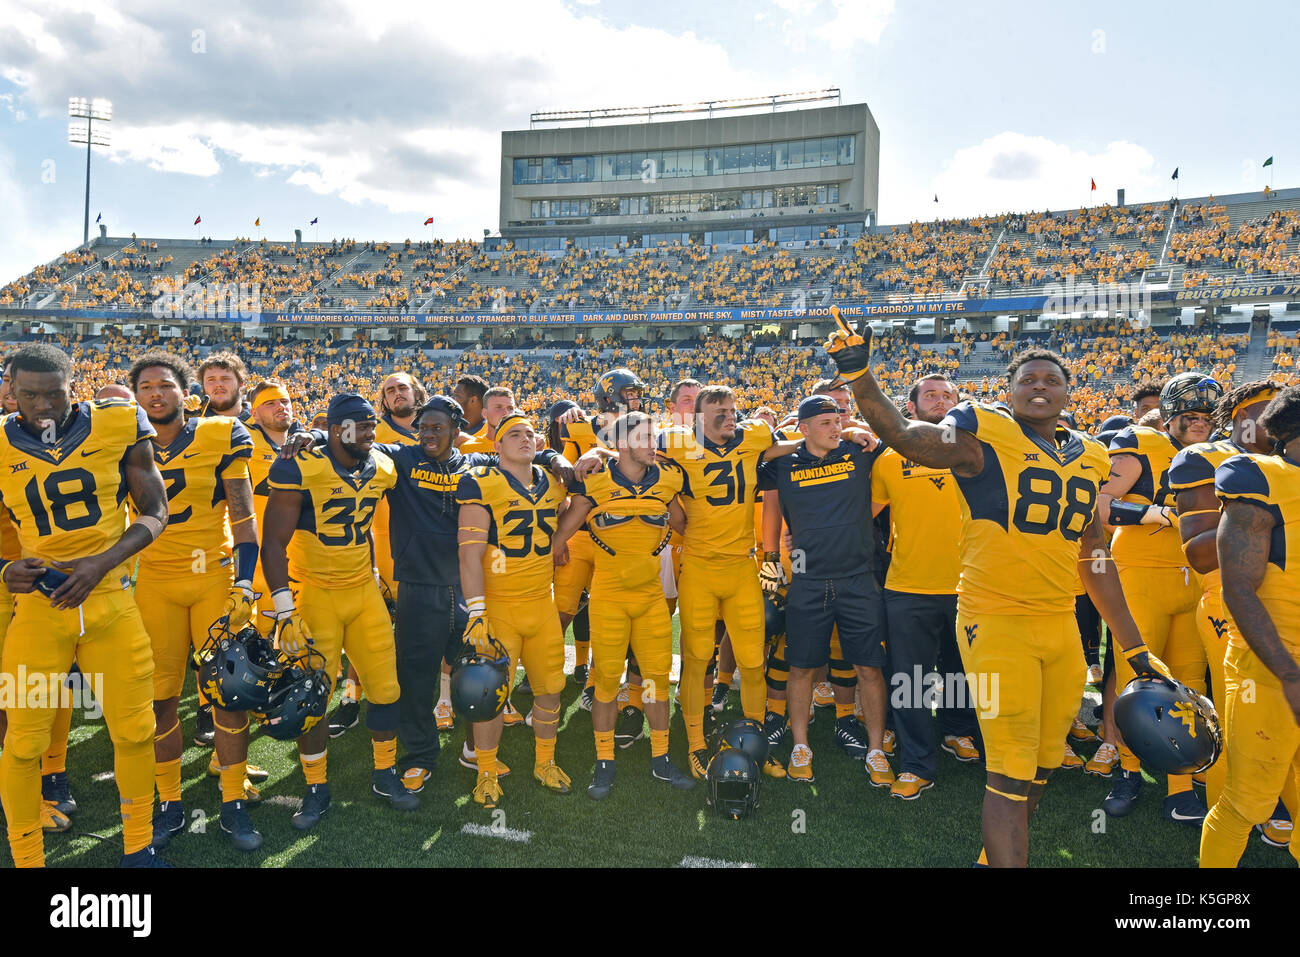 Morgantown, West Virginia, USA. 9th Sep, 2017. The West Virginia Mountaineers football team sings Country Roads to the students following the game played at Mountaineer Field in Morgantown, WV. WVU beat ECU 56-20. Credit: Ken Inness/ZUMA Wire/Alamy Live News Stock Photo